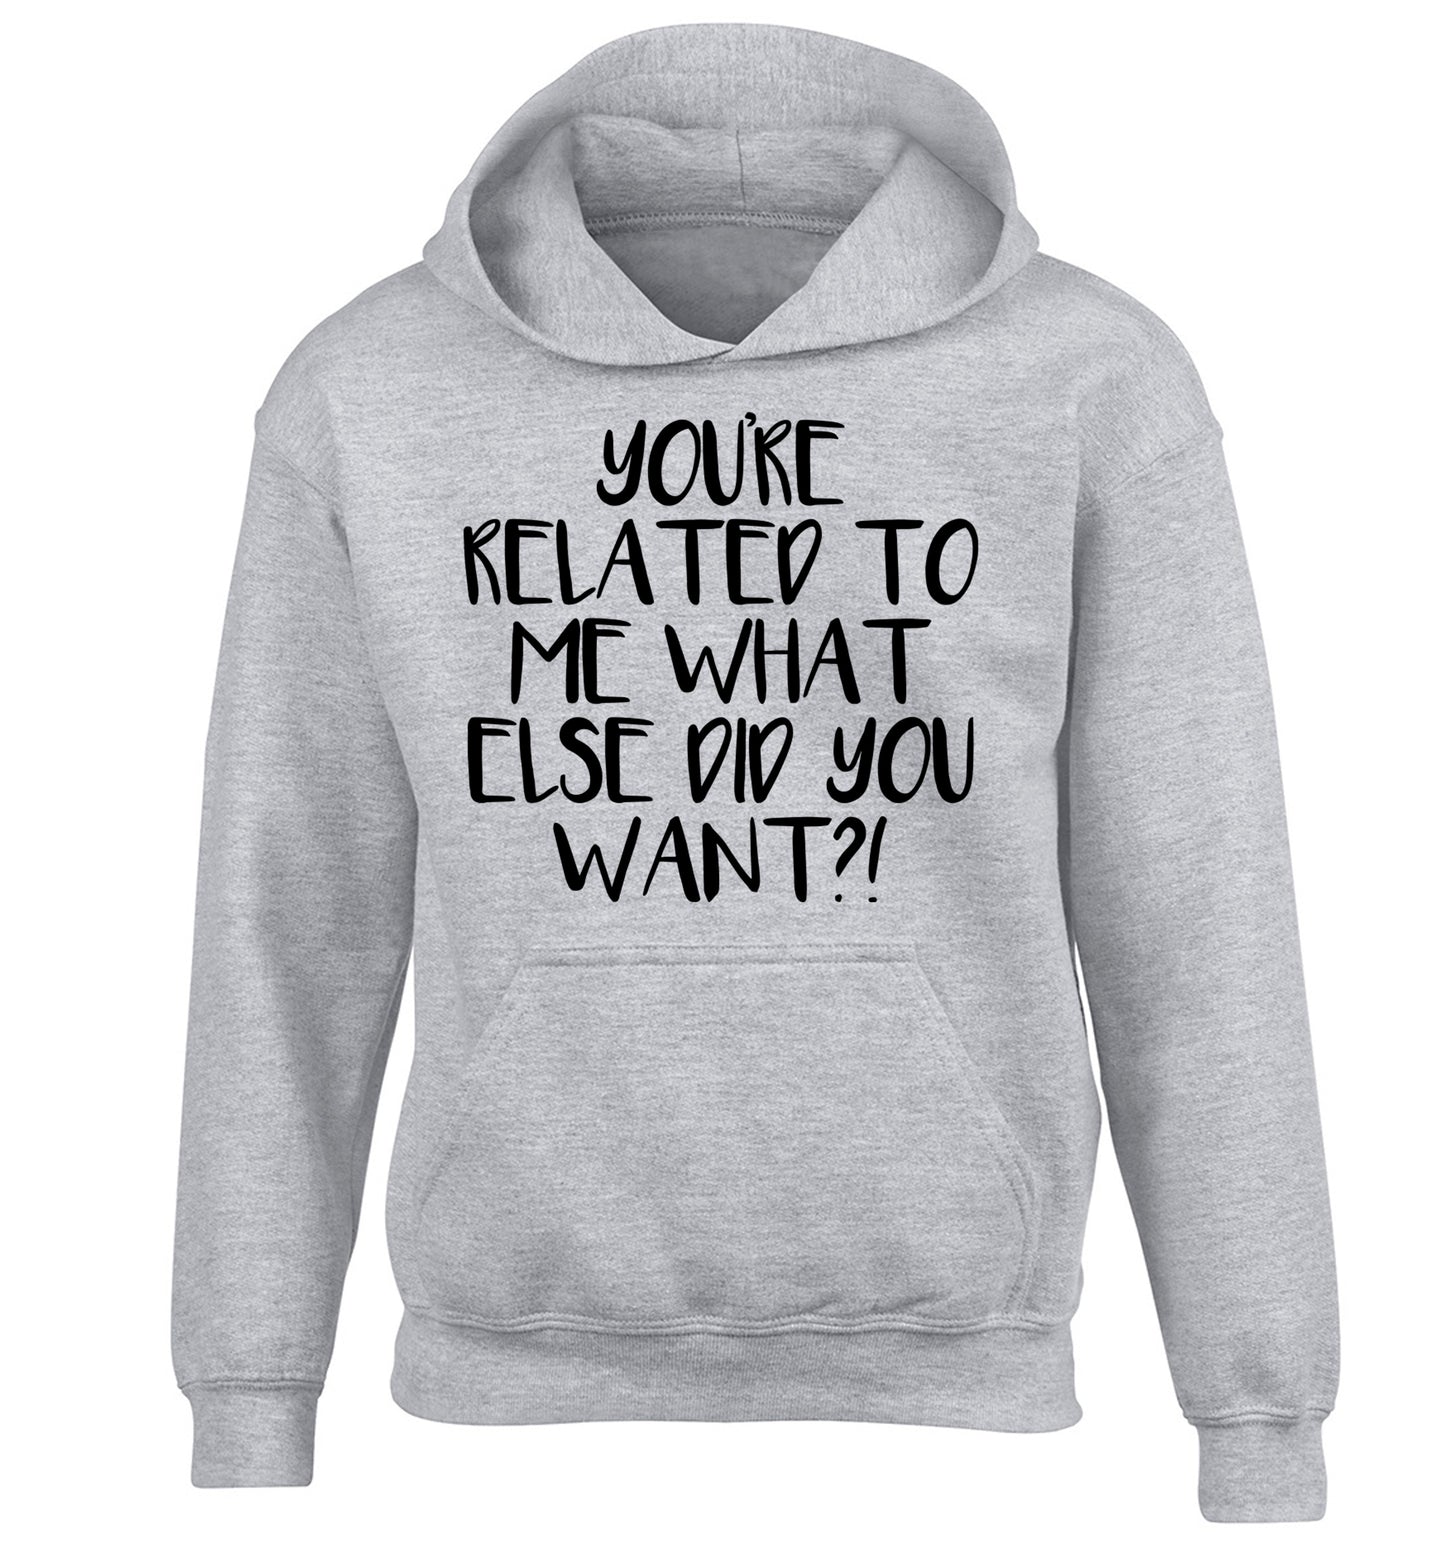 You're related to me what more do you want? children's grey hoodie 12-13 Years